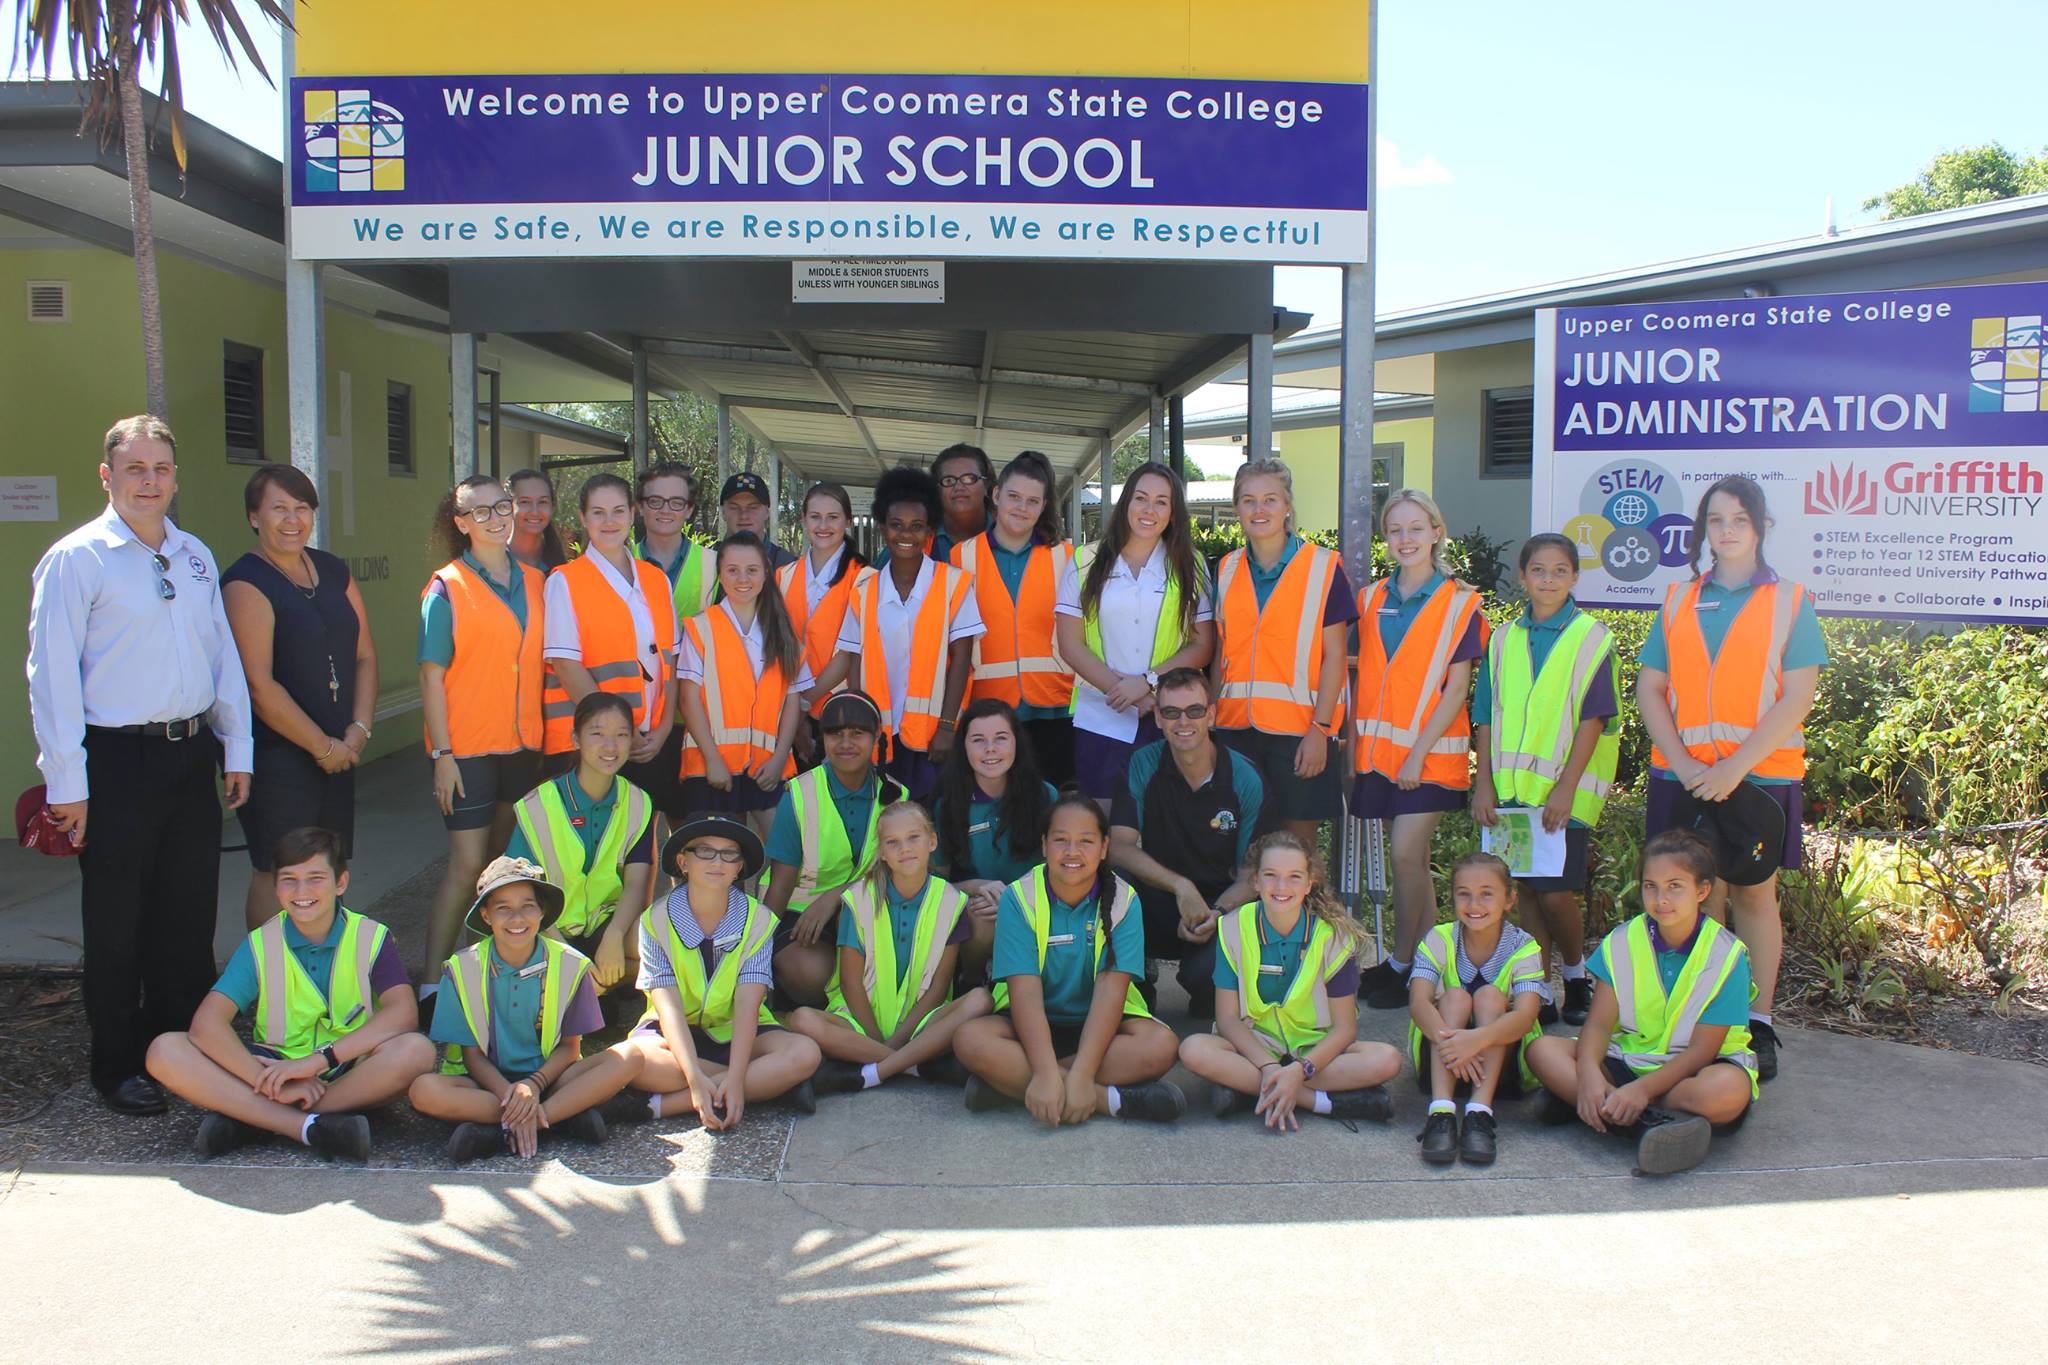 Great Work Upper Coomera State College